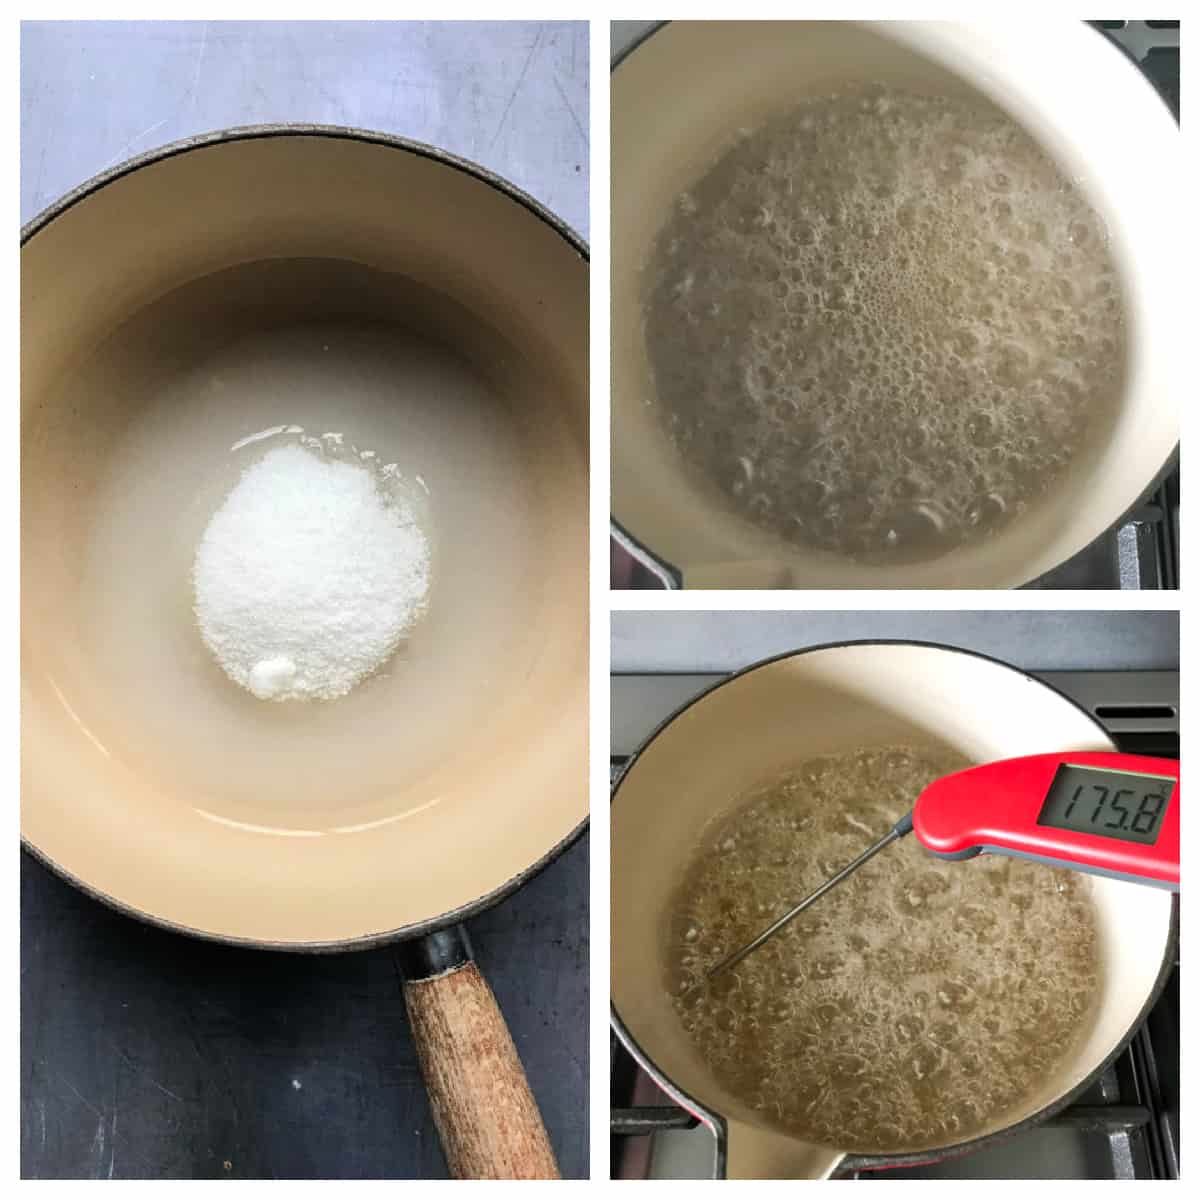 Melting the sugar and water together.